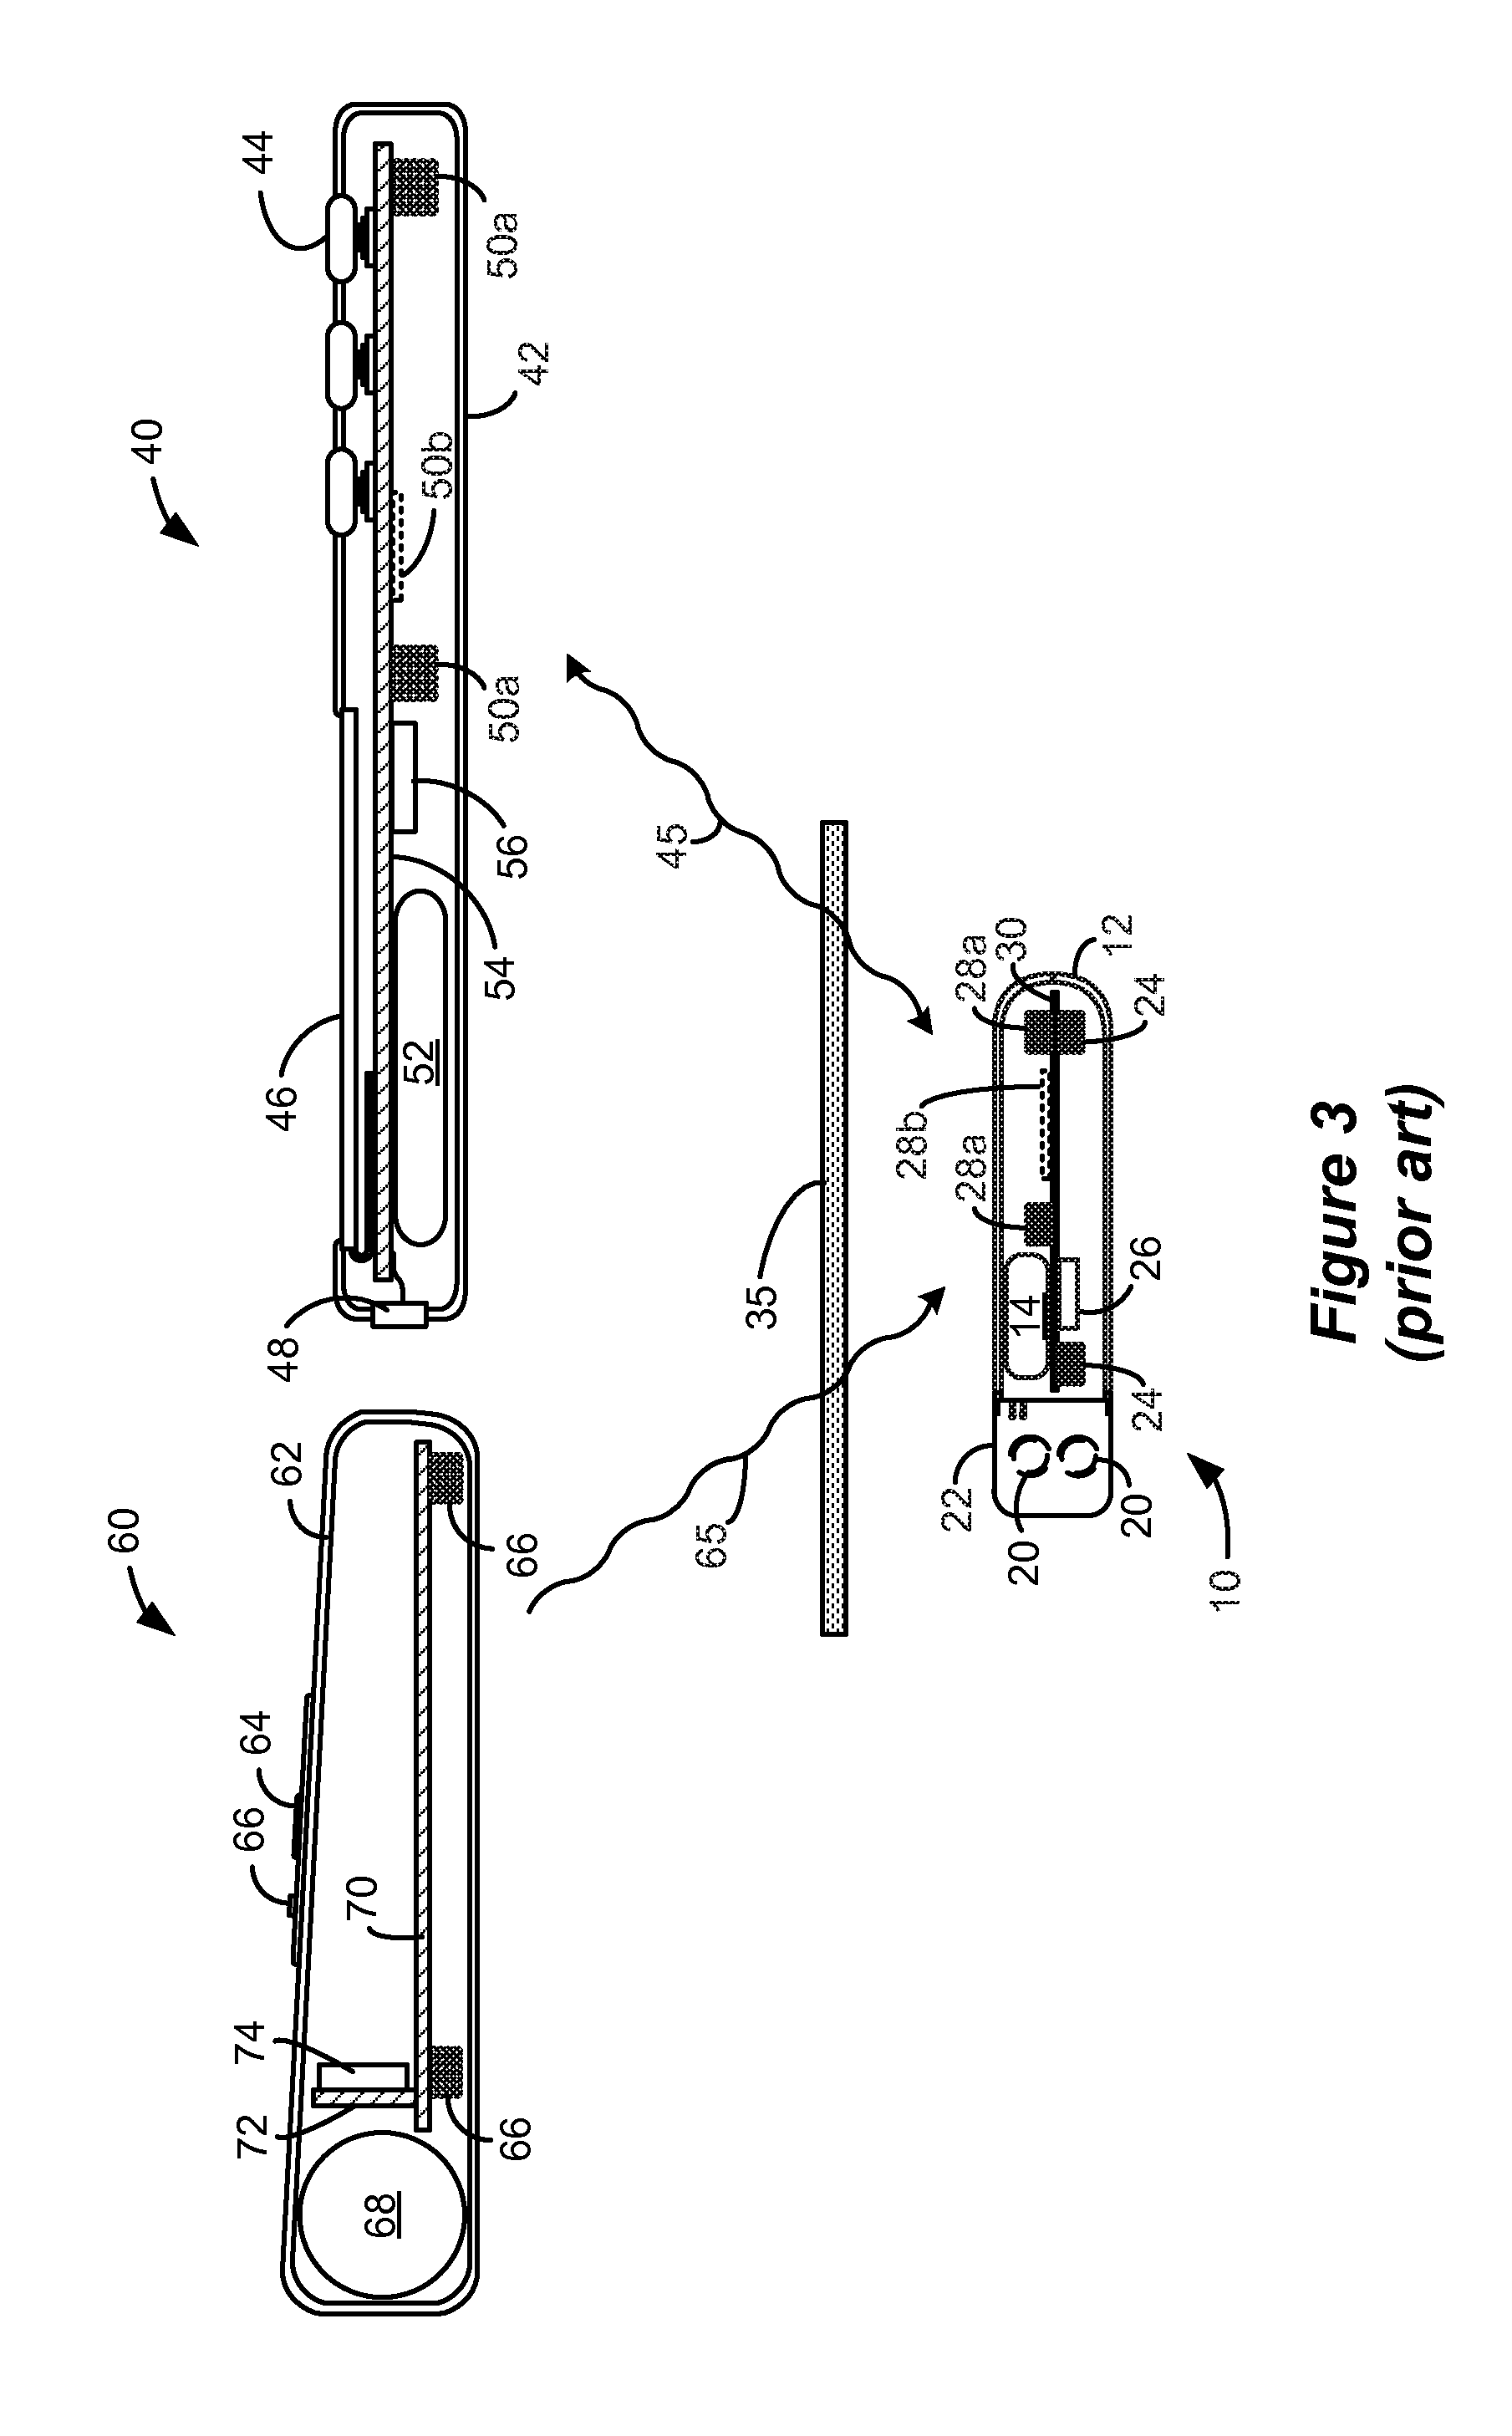 External Controller for an Implantable Medical Device System with an External Charging Coil Powered by an External Battery